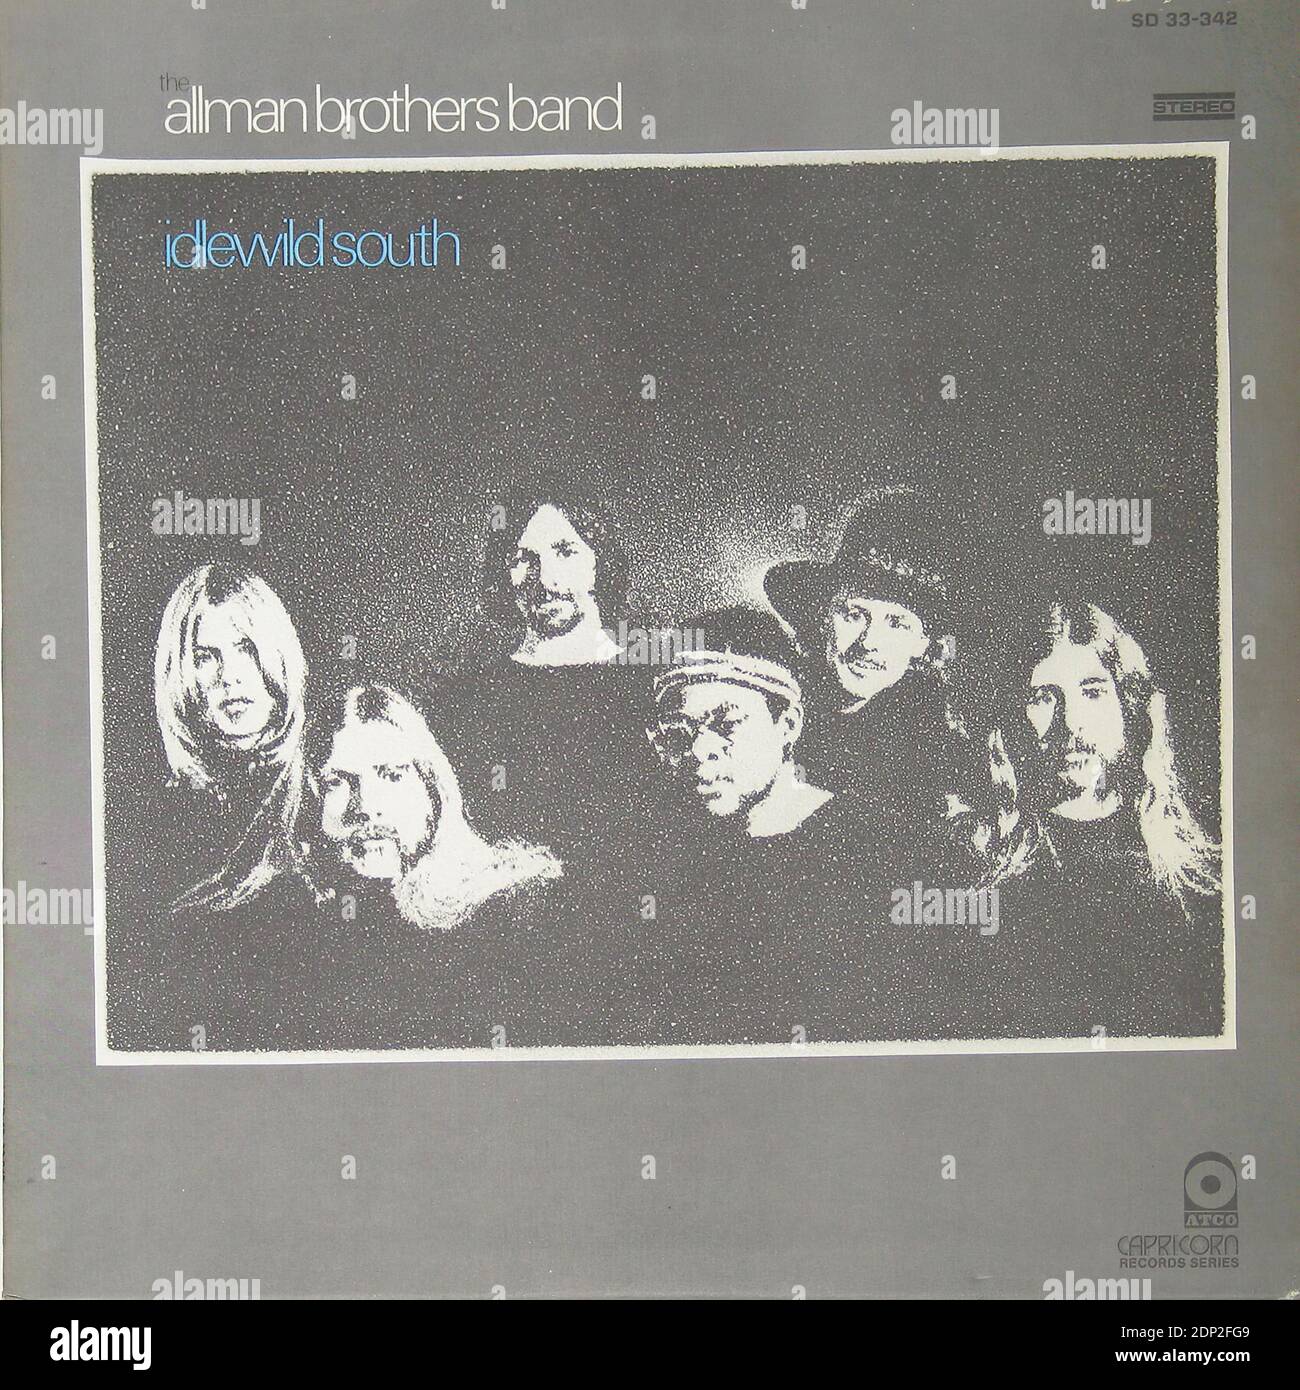 Allman Brothers Band Idlewild South - Vintage Vinyl Record Cover Stock Photo